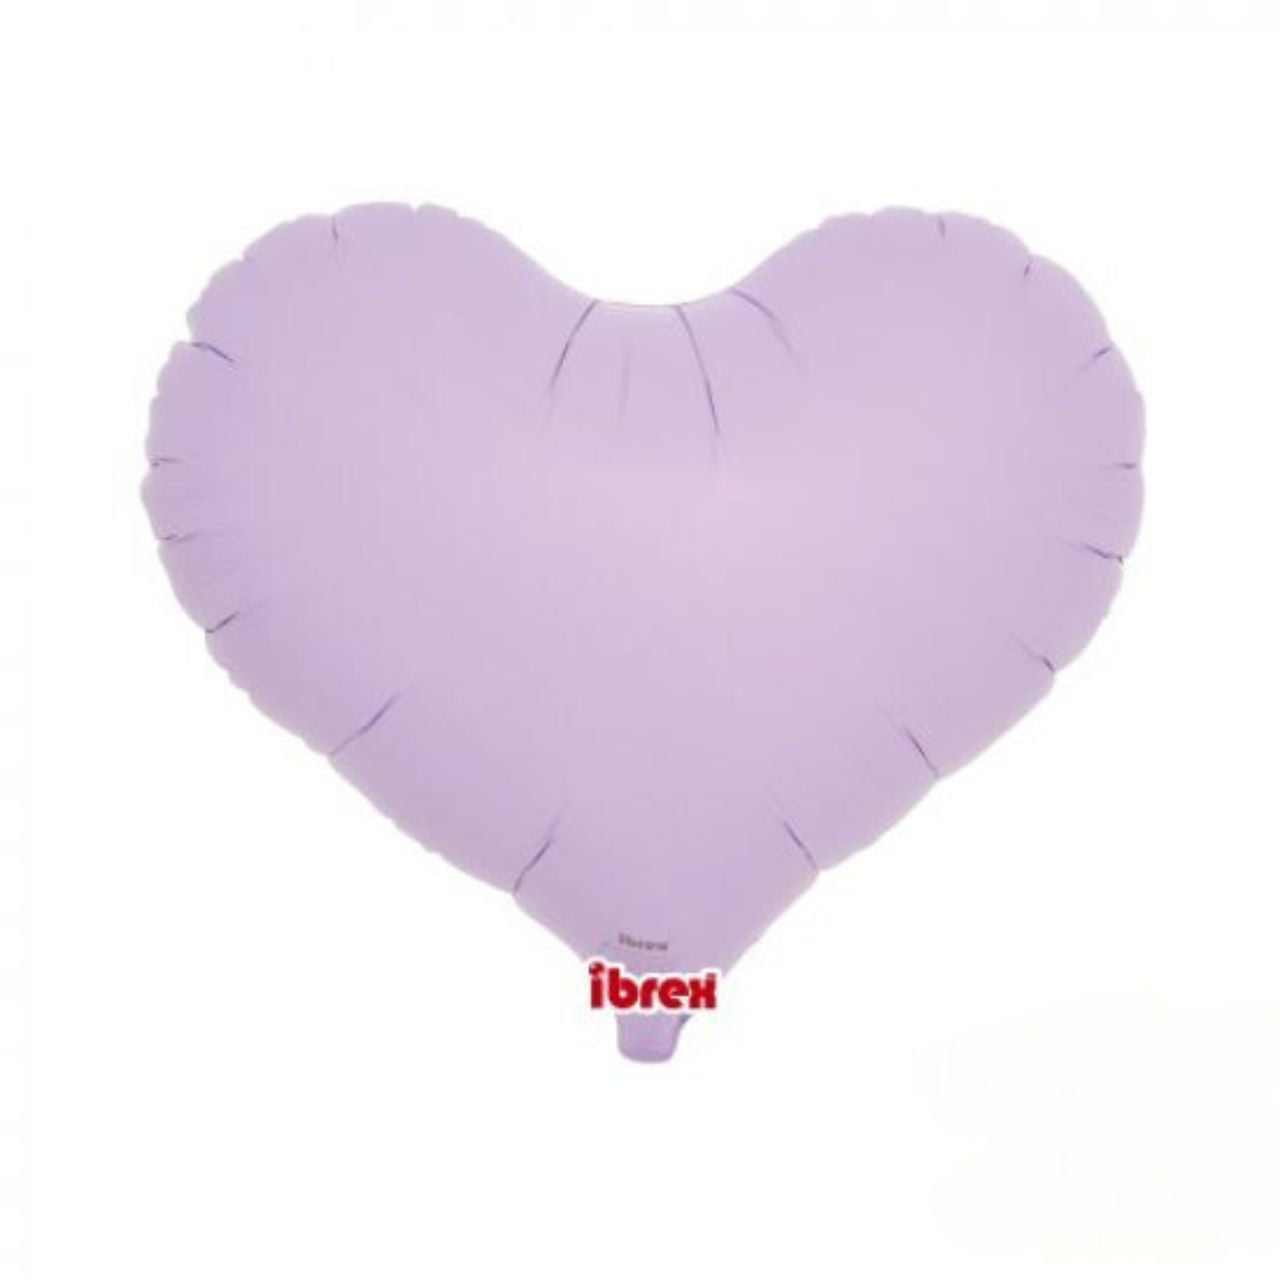 Ibreh Pastel Lavender Jelly Heart Foil Balloon (unpackaged)